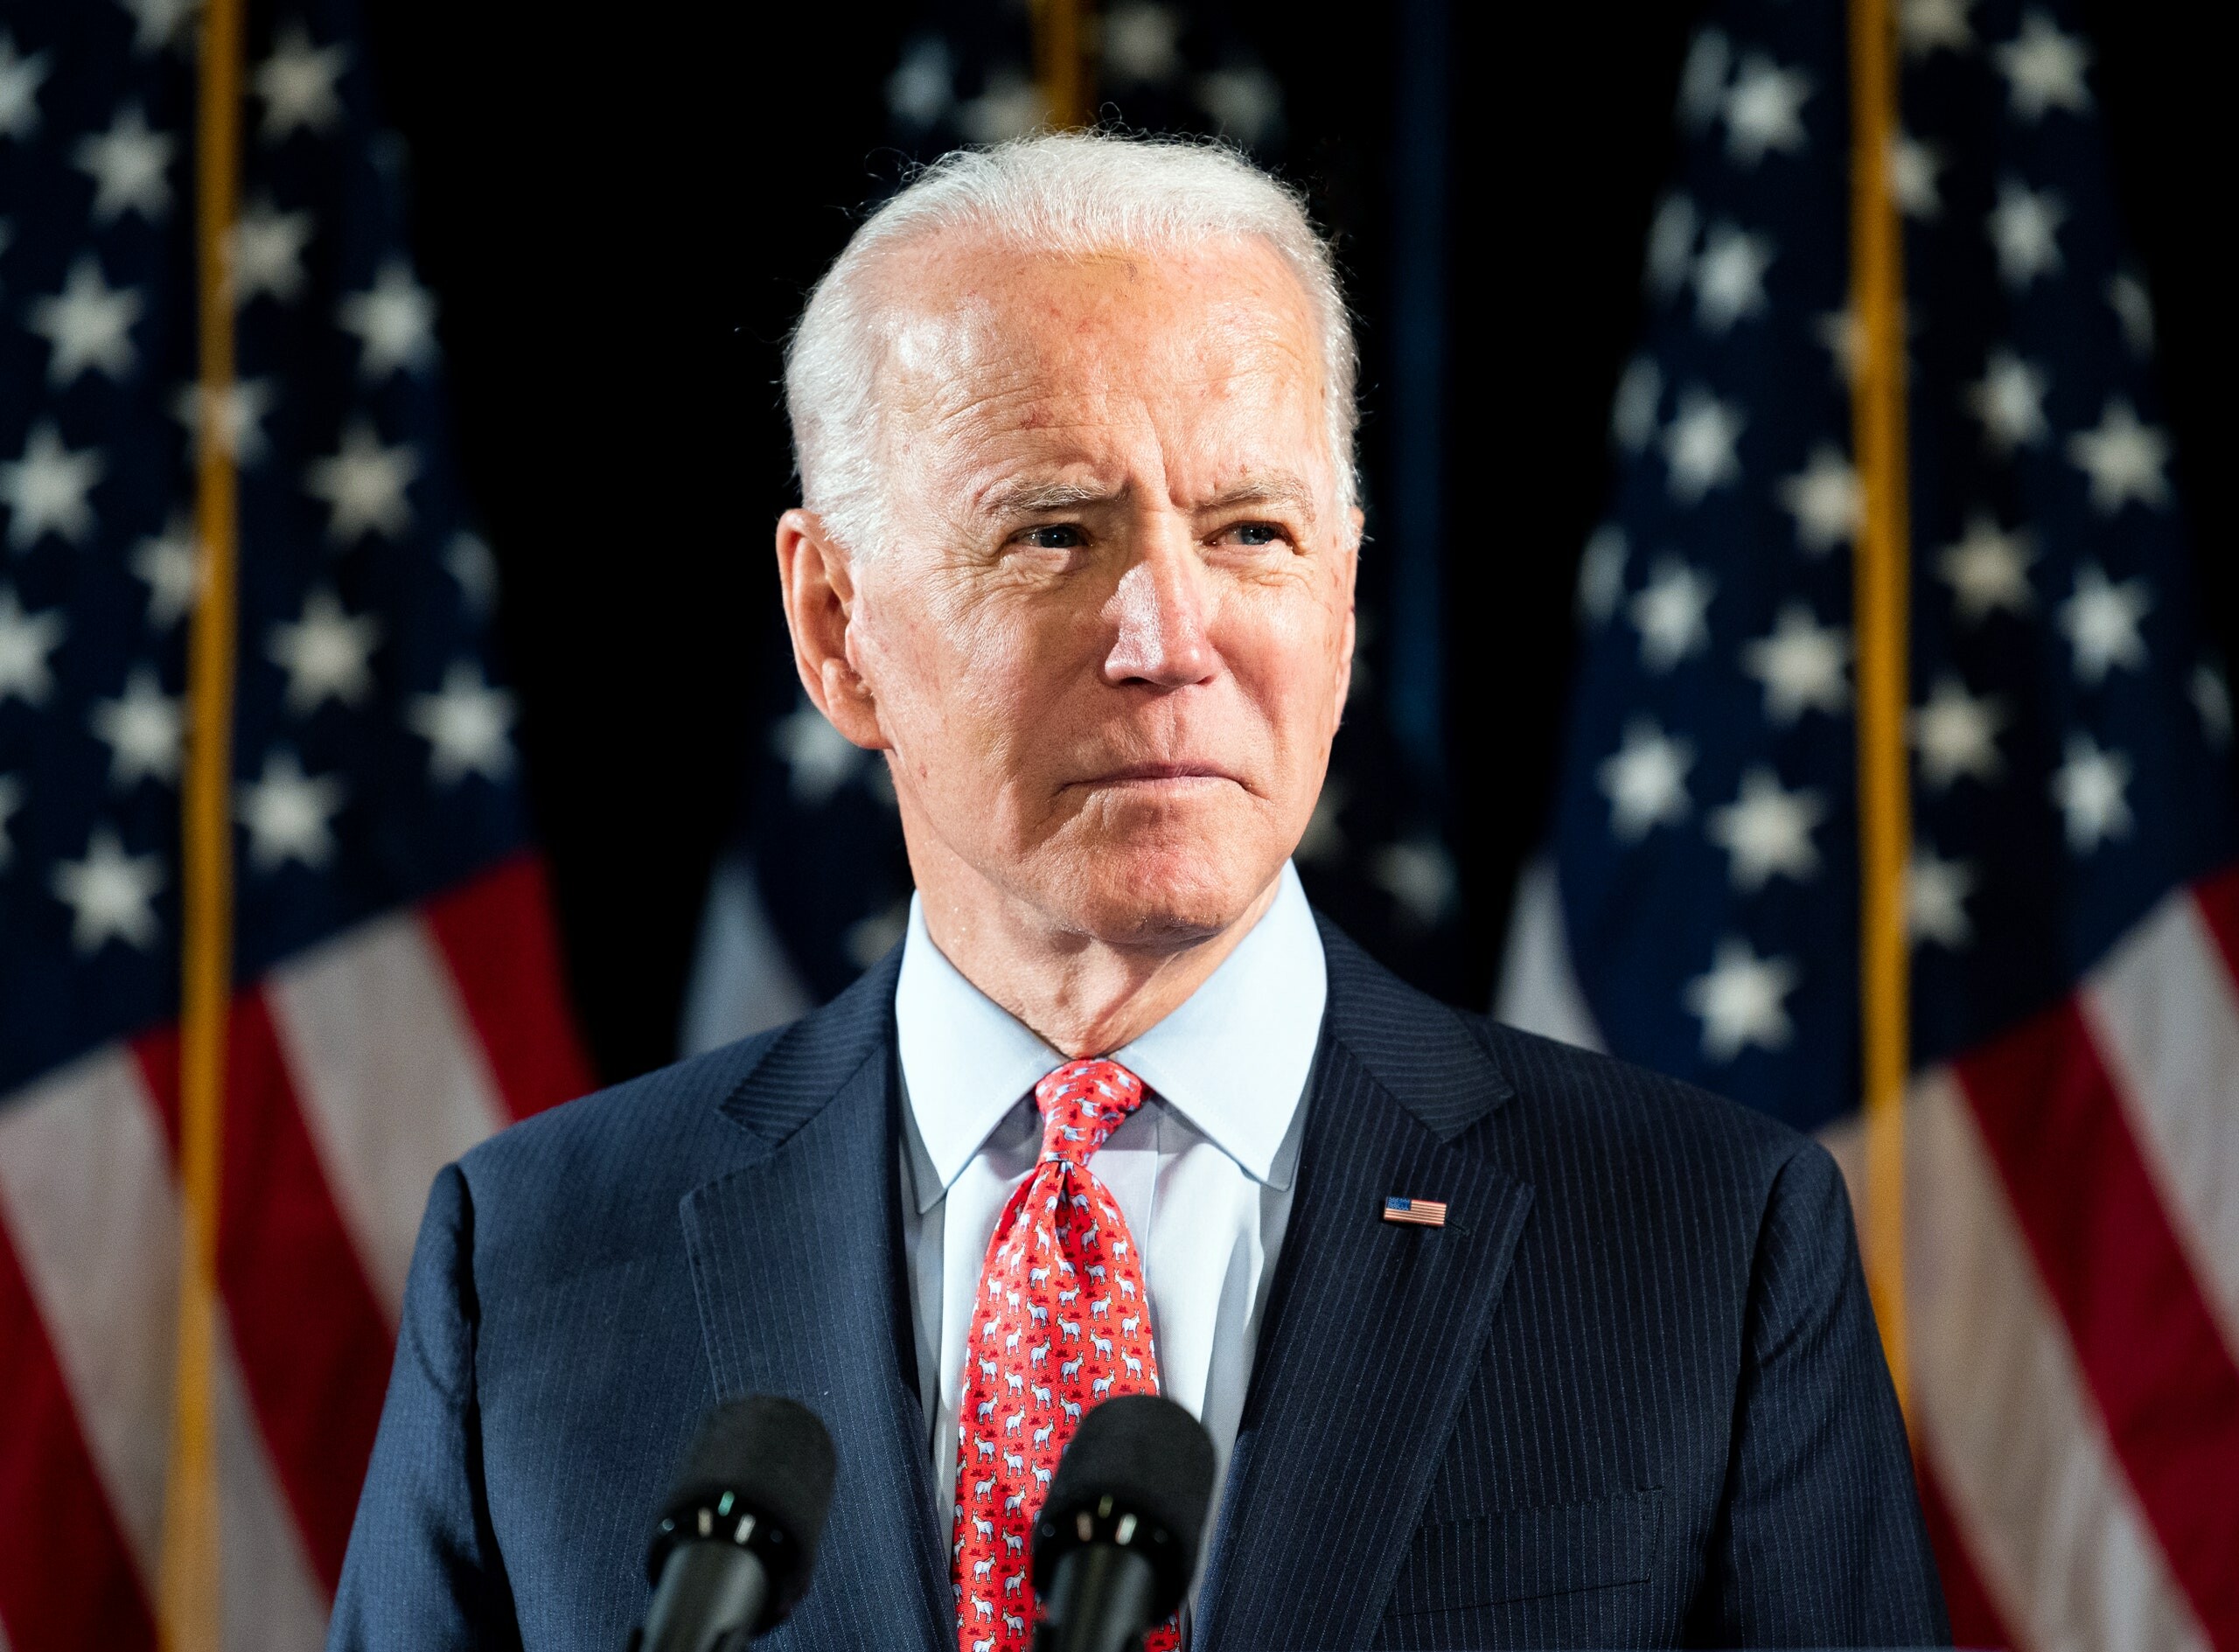 Joe Biden: The 46th and current president of the United States. 2560x1890 HD Wallpaper.